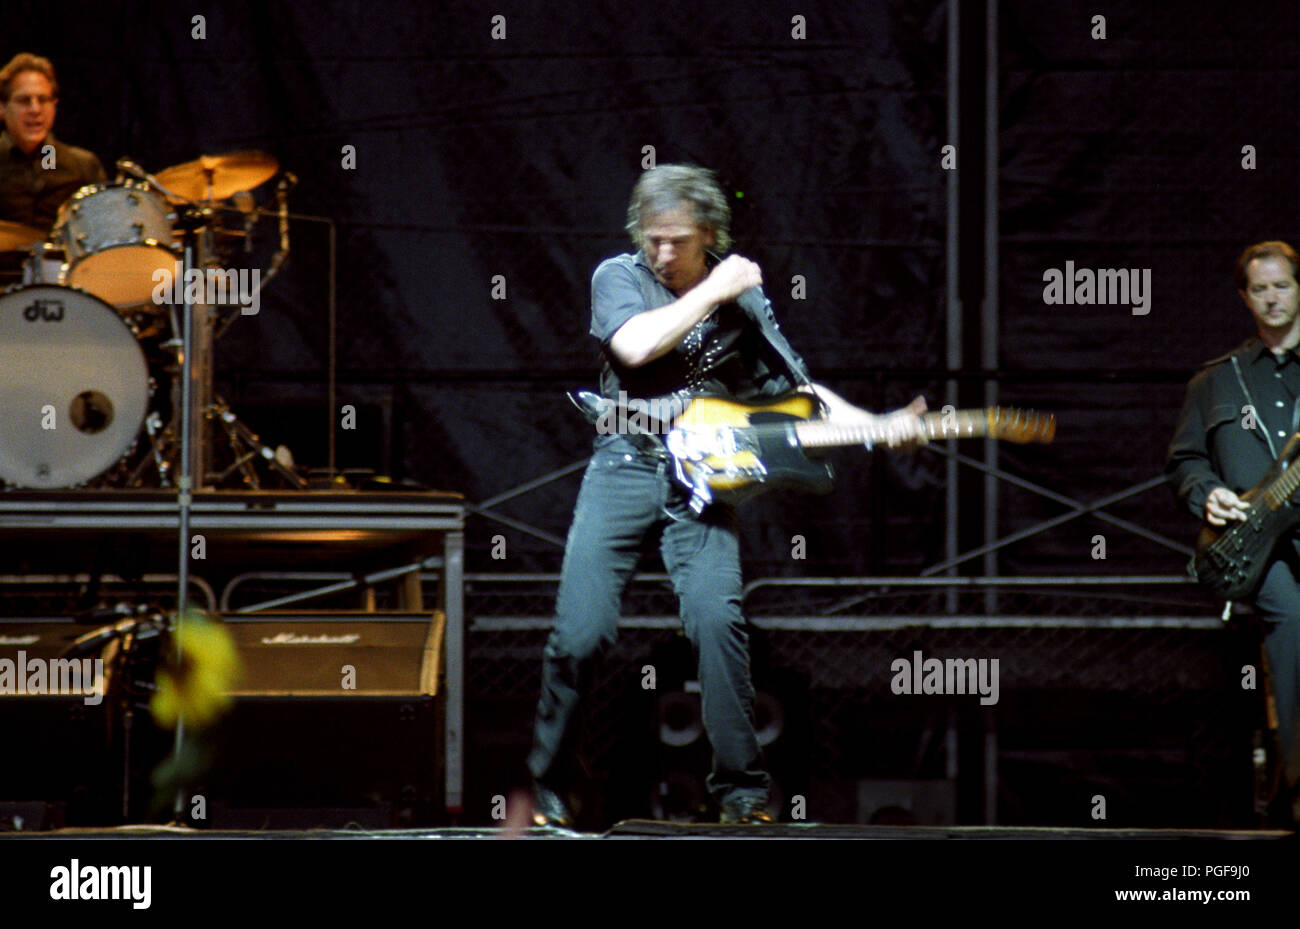 Bruce Springsteen & E Street Band concert in Brussels during the “Rising Tour” (Belgium, 12/05/2003) Stock Photo